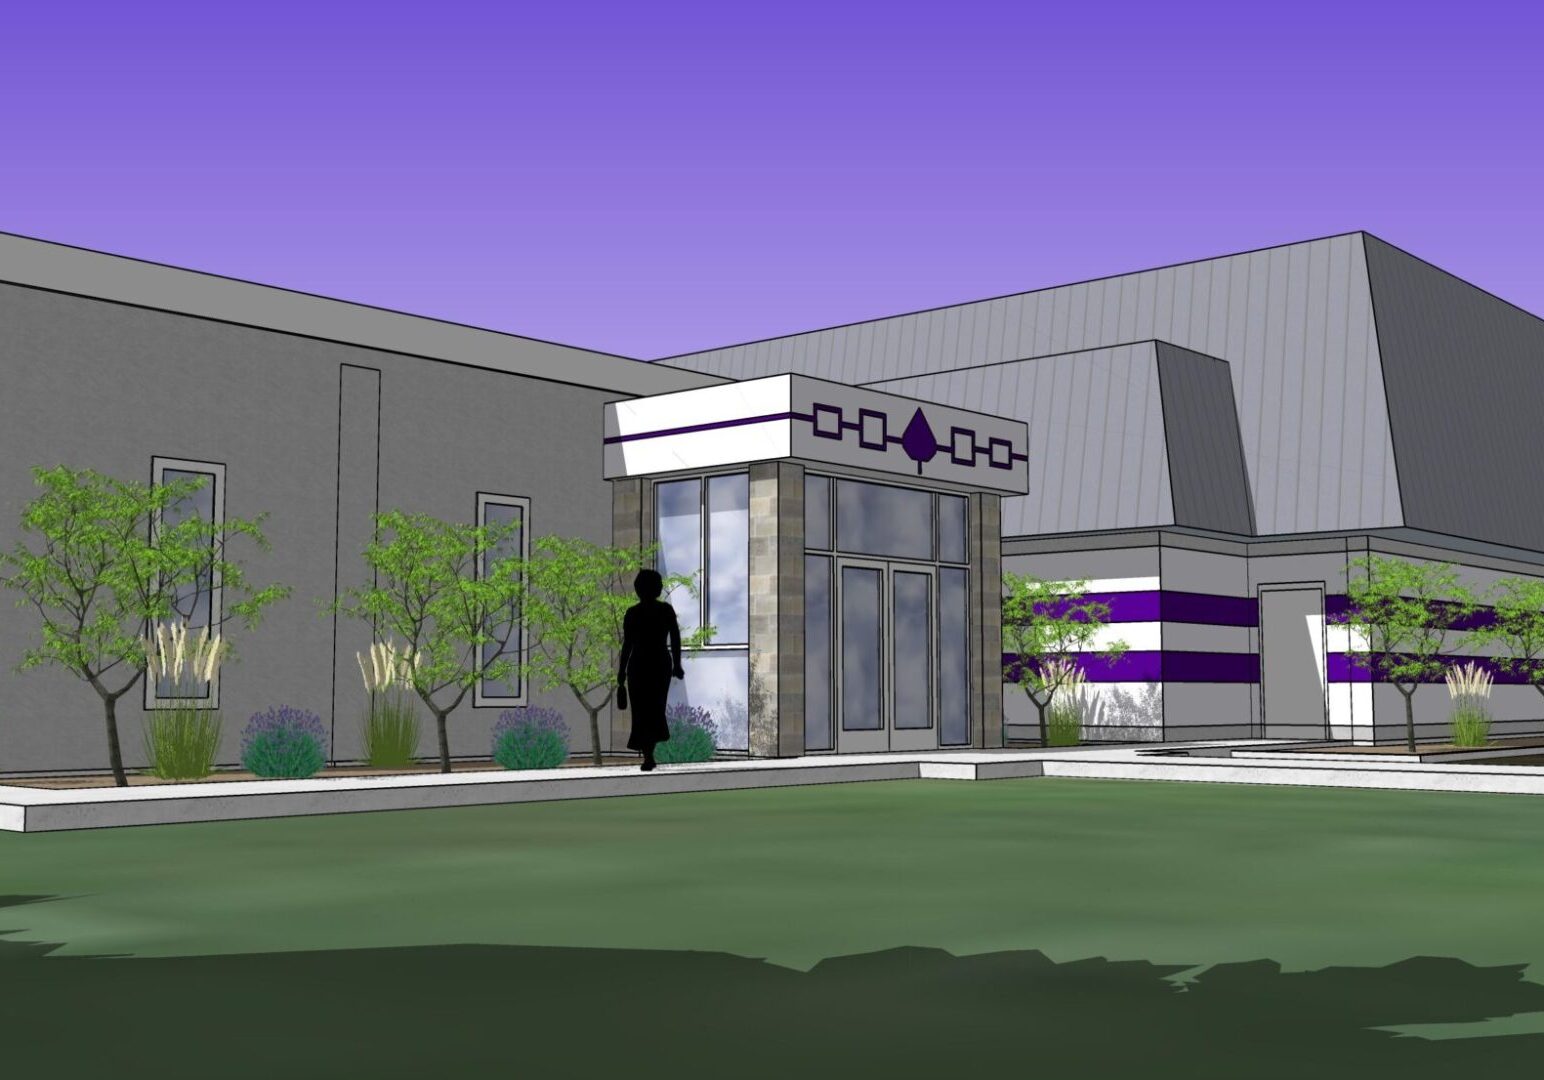 Digital rendering of a modern commercial building with a person entering the glass door entrance.